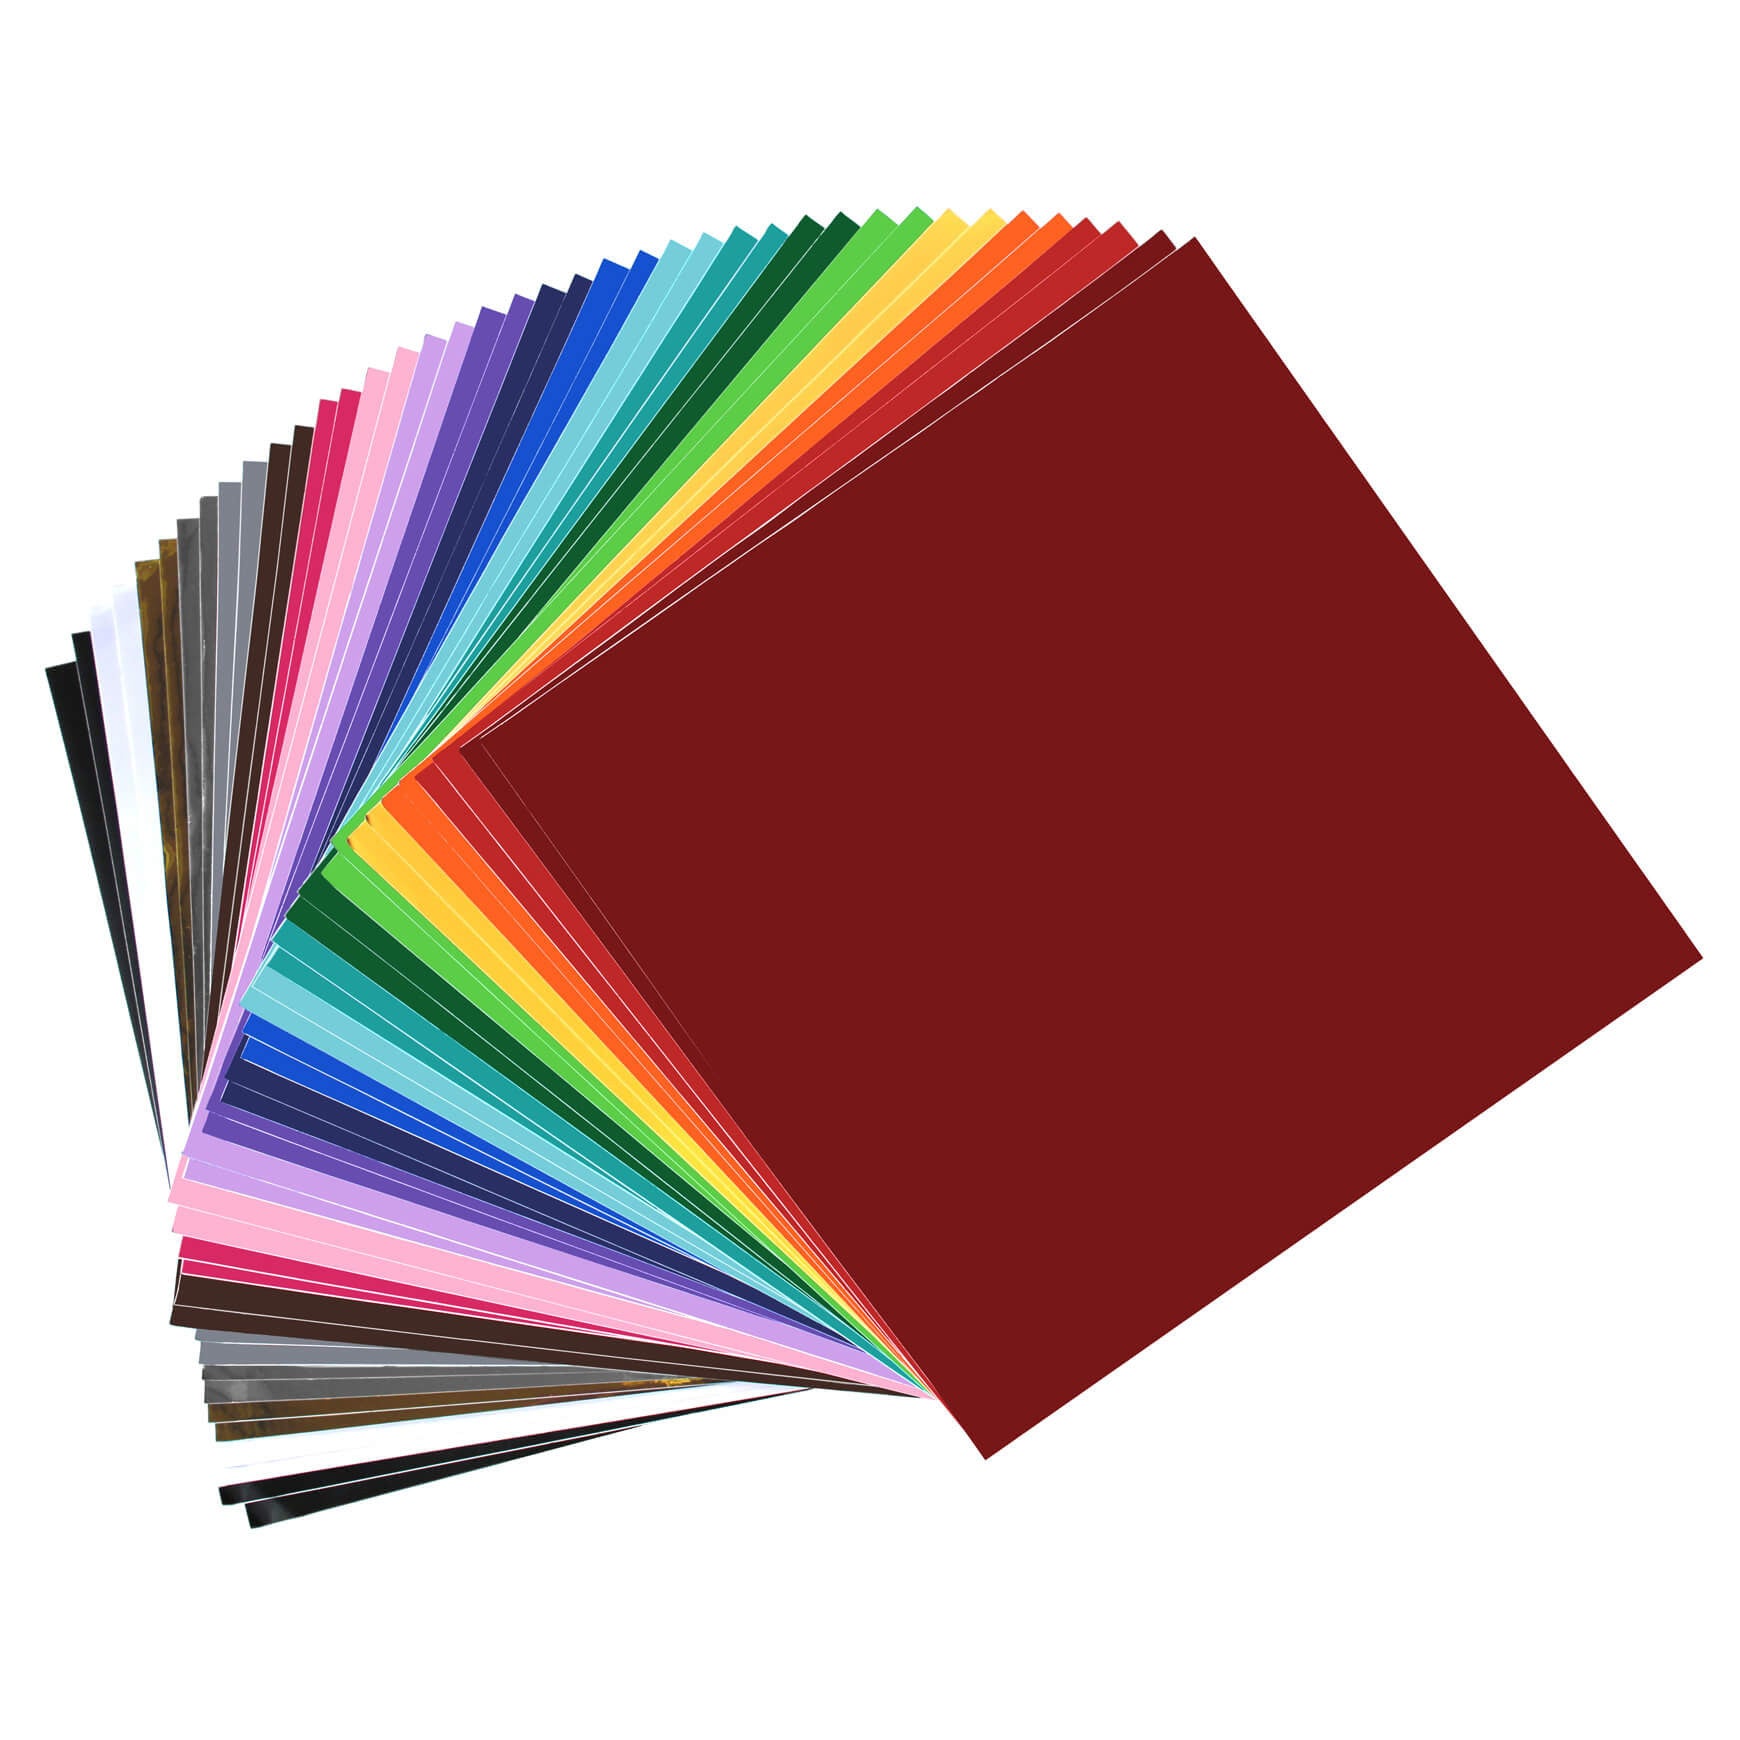 IModeur Permanent Adhesive Backed Vinyl Sheets (40 Packs, 12x12) - 40  Assorted Glossy Colors Adhesive Vinyl Sheets for All Kinds of Cutting  Machines